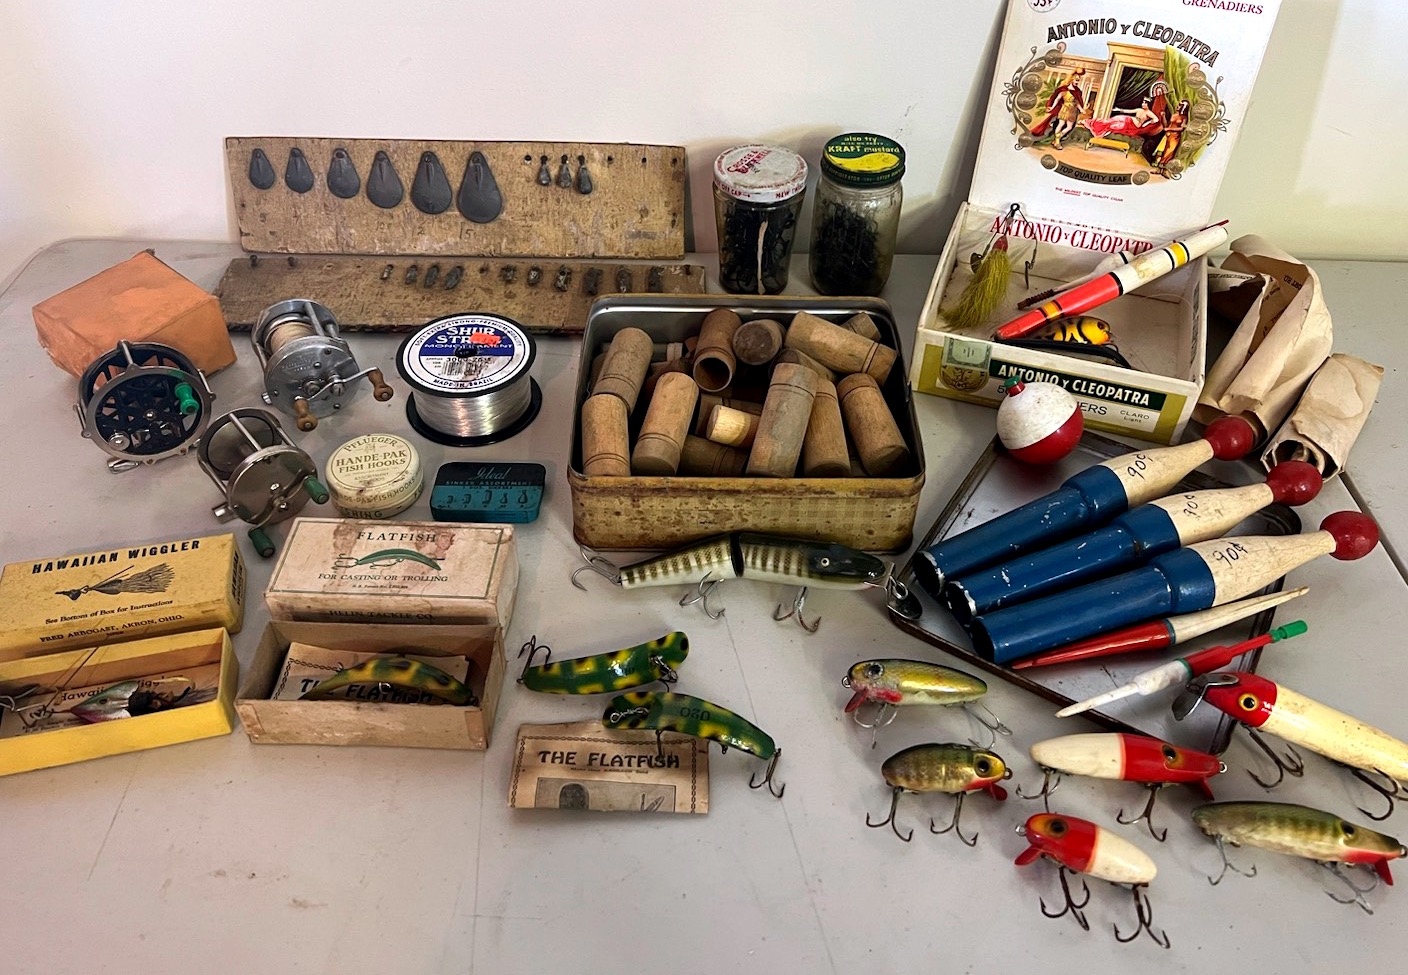 Vintage-Fishing-Gear-With-Reels-Bobbers-Sinker-Price-Boards-Wooden-Lures -More